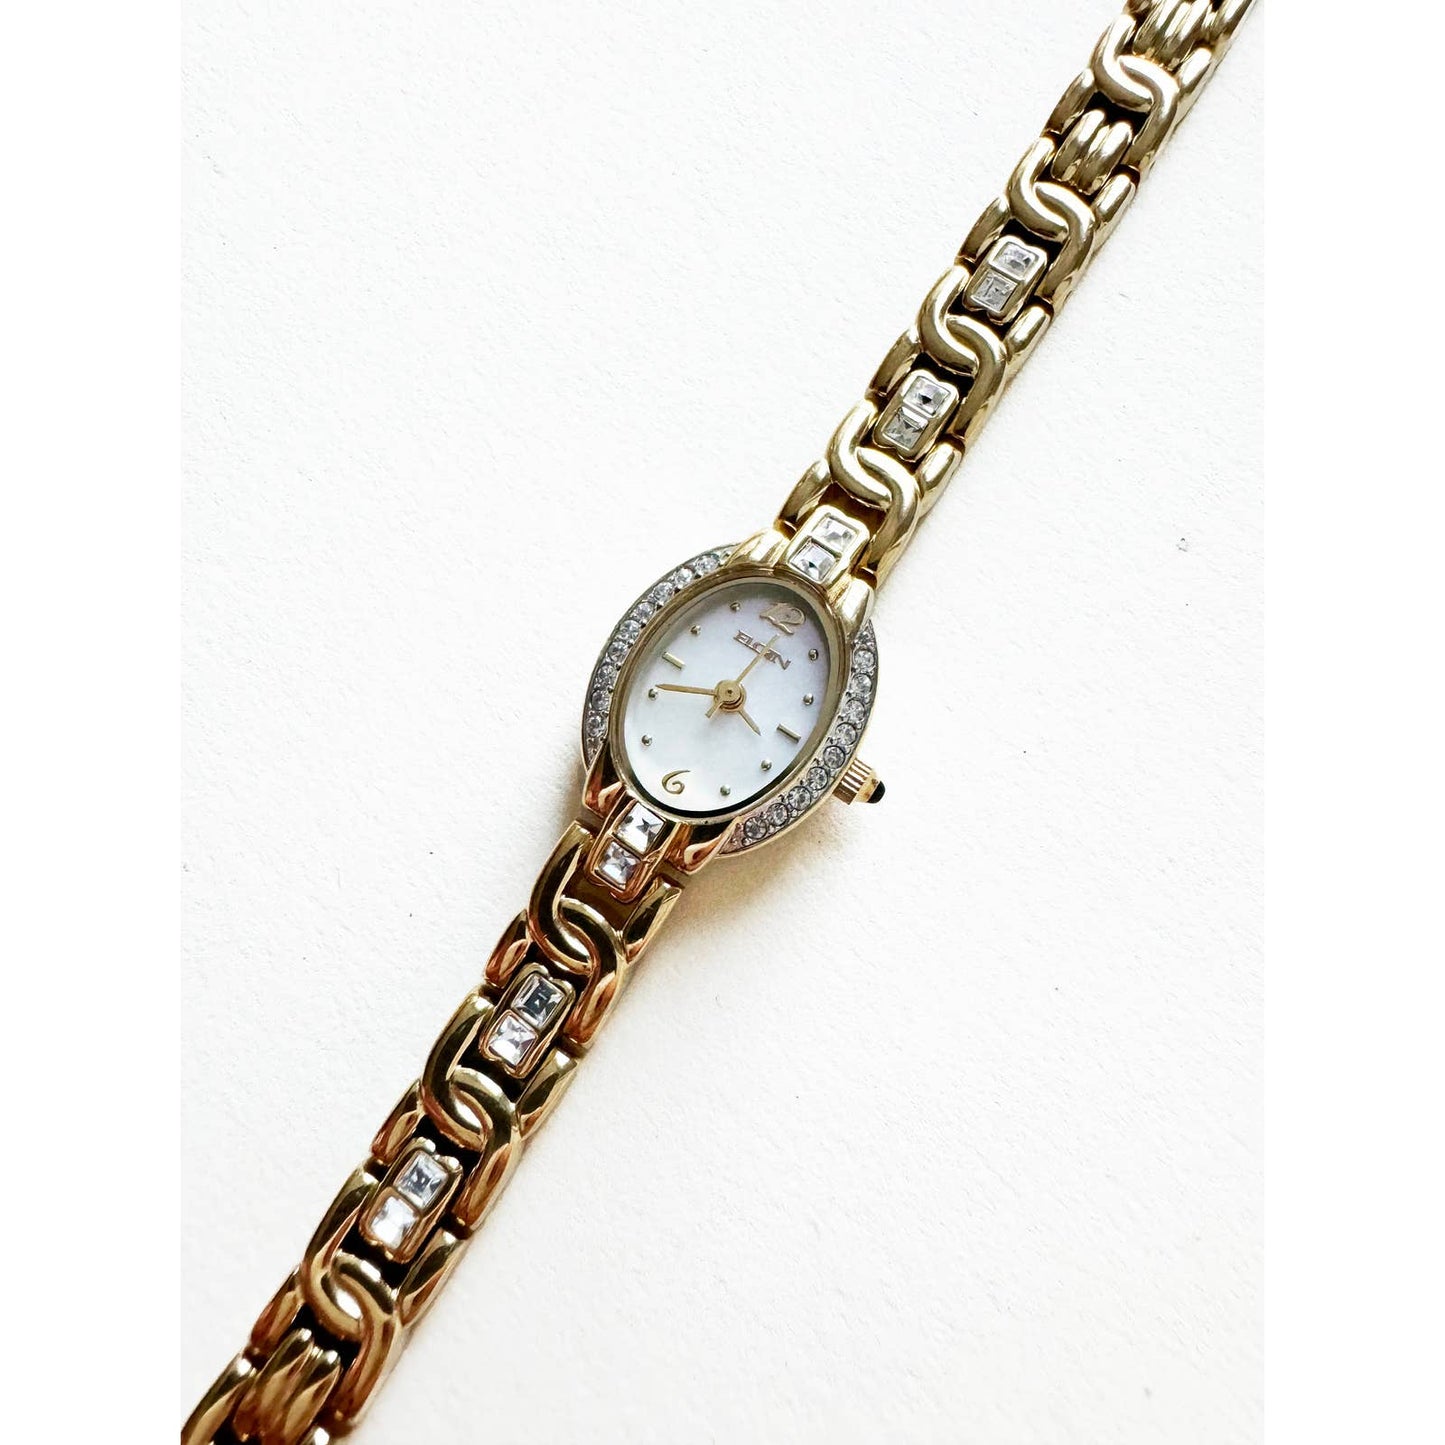 Vintage Small Gold Watch with Crystal Face | Elgin